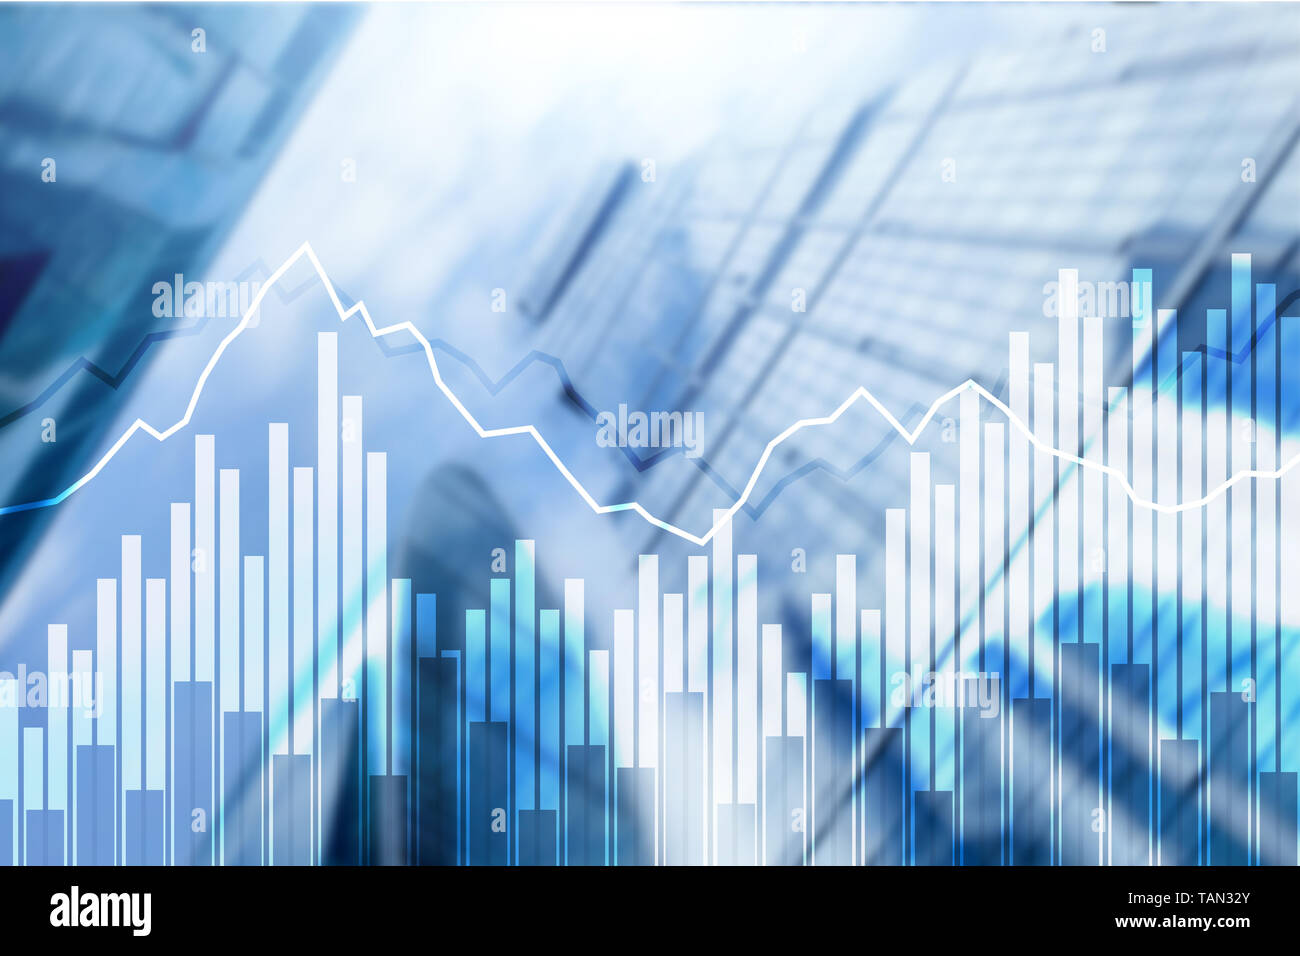 Double exposure Financial graphs and diagrams. Business, economics and investment concept. Stock Photo